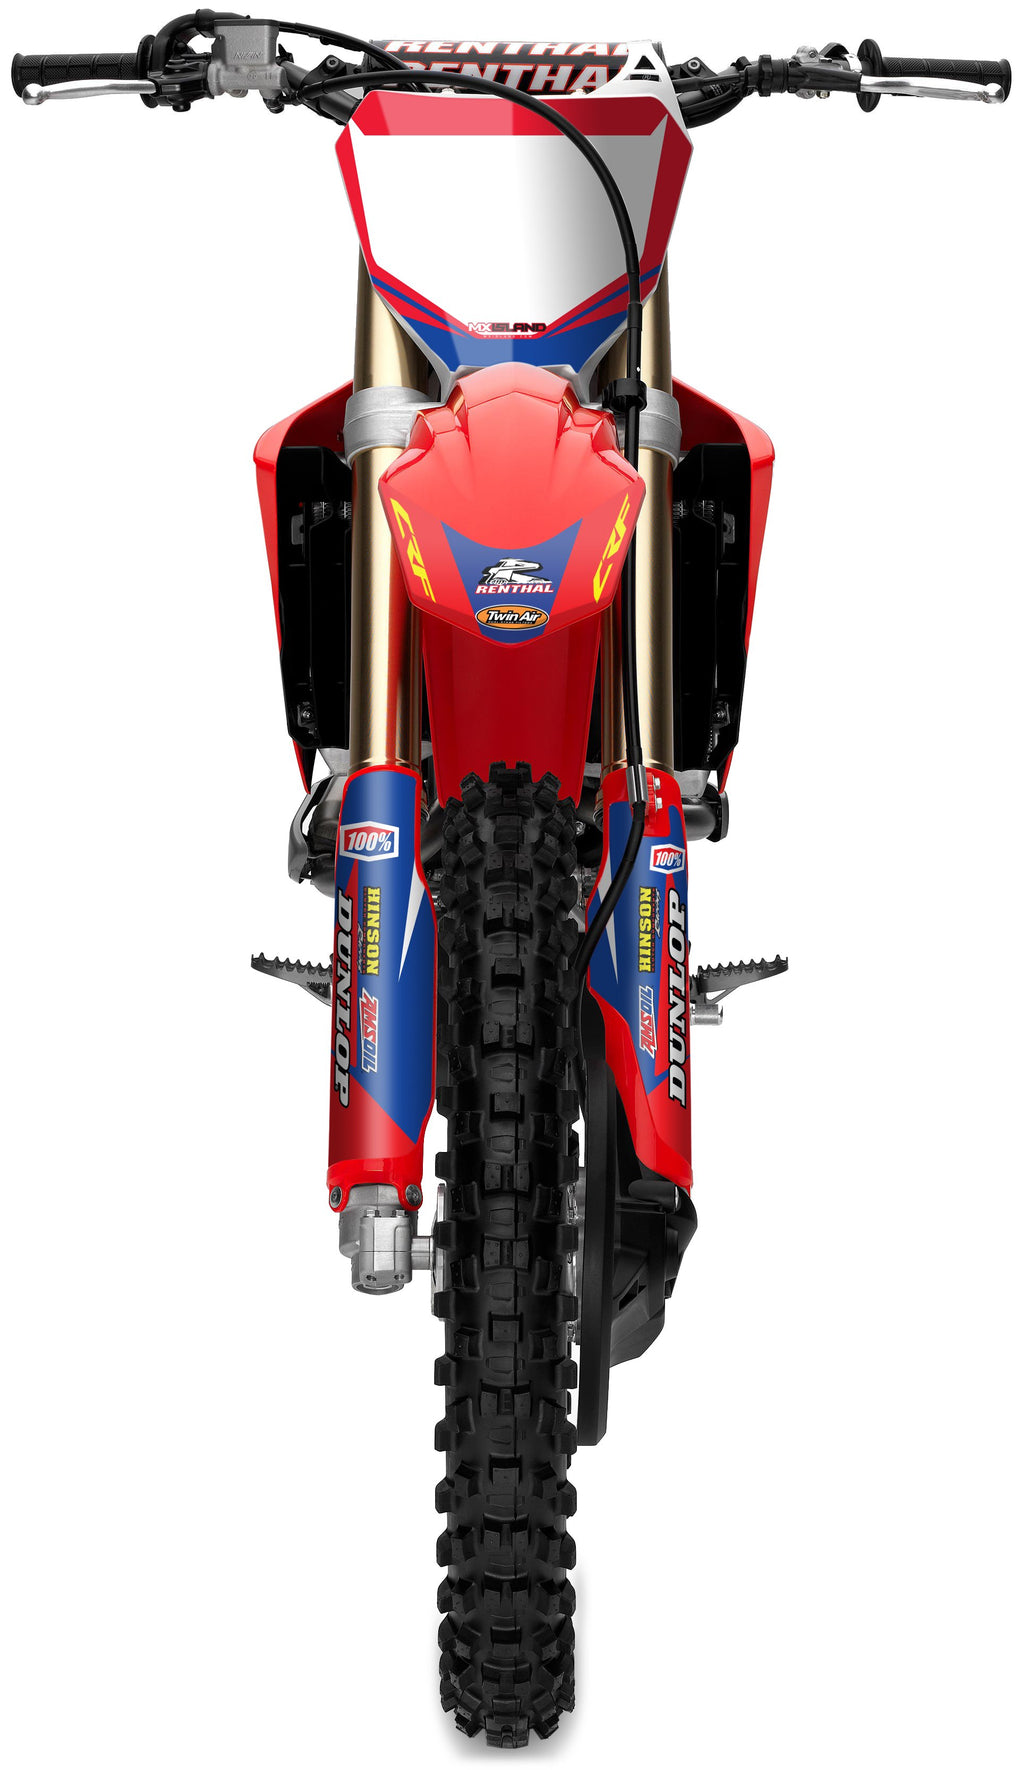 FACTORY RIDER: BLUE/RED Honda Complete Graphics Kit